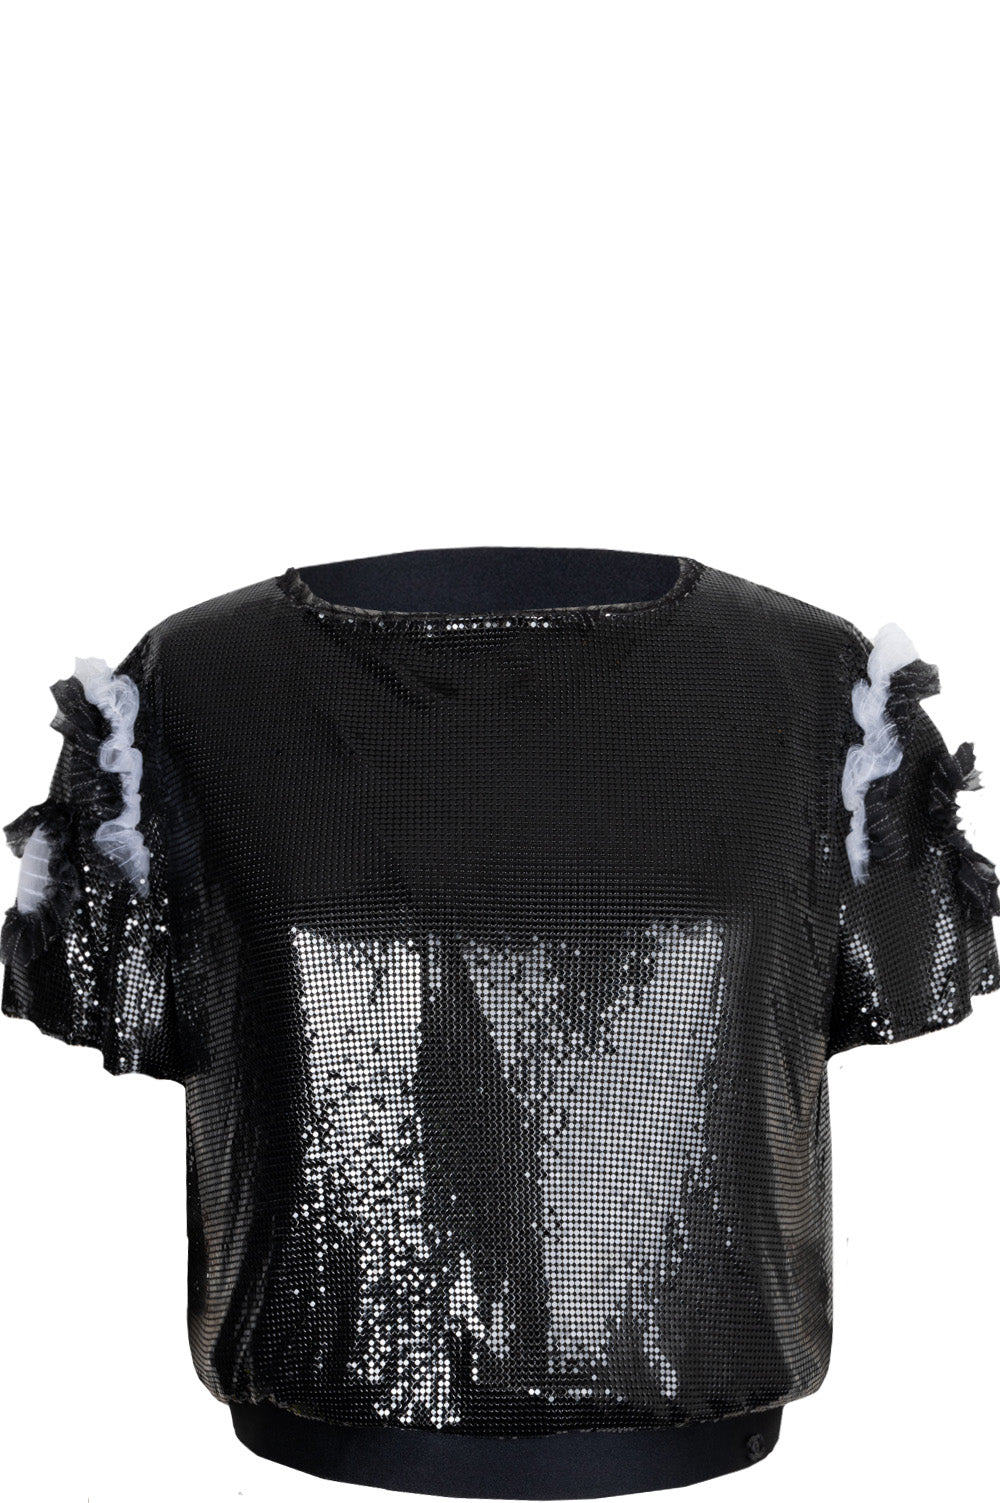 CHANEL Chainmail Buttoned Top Black